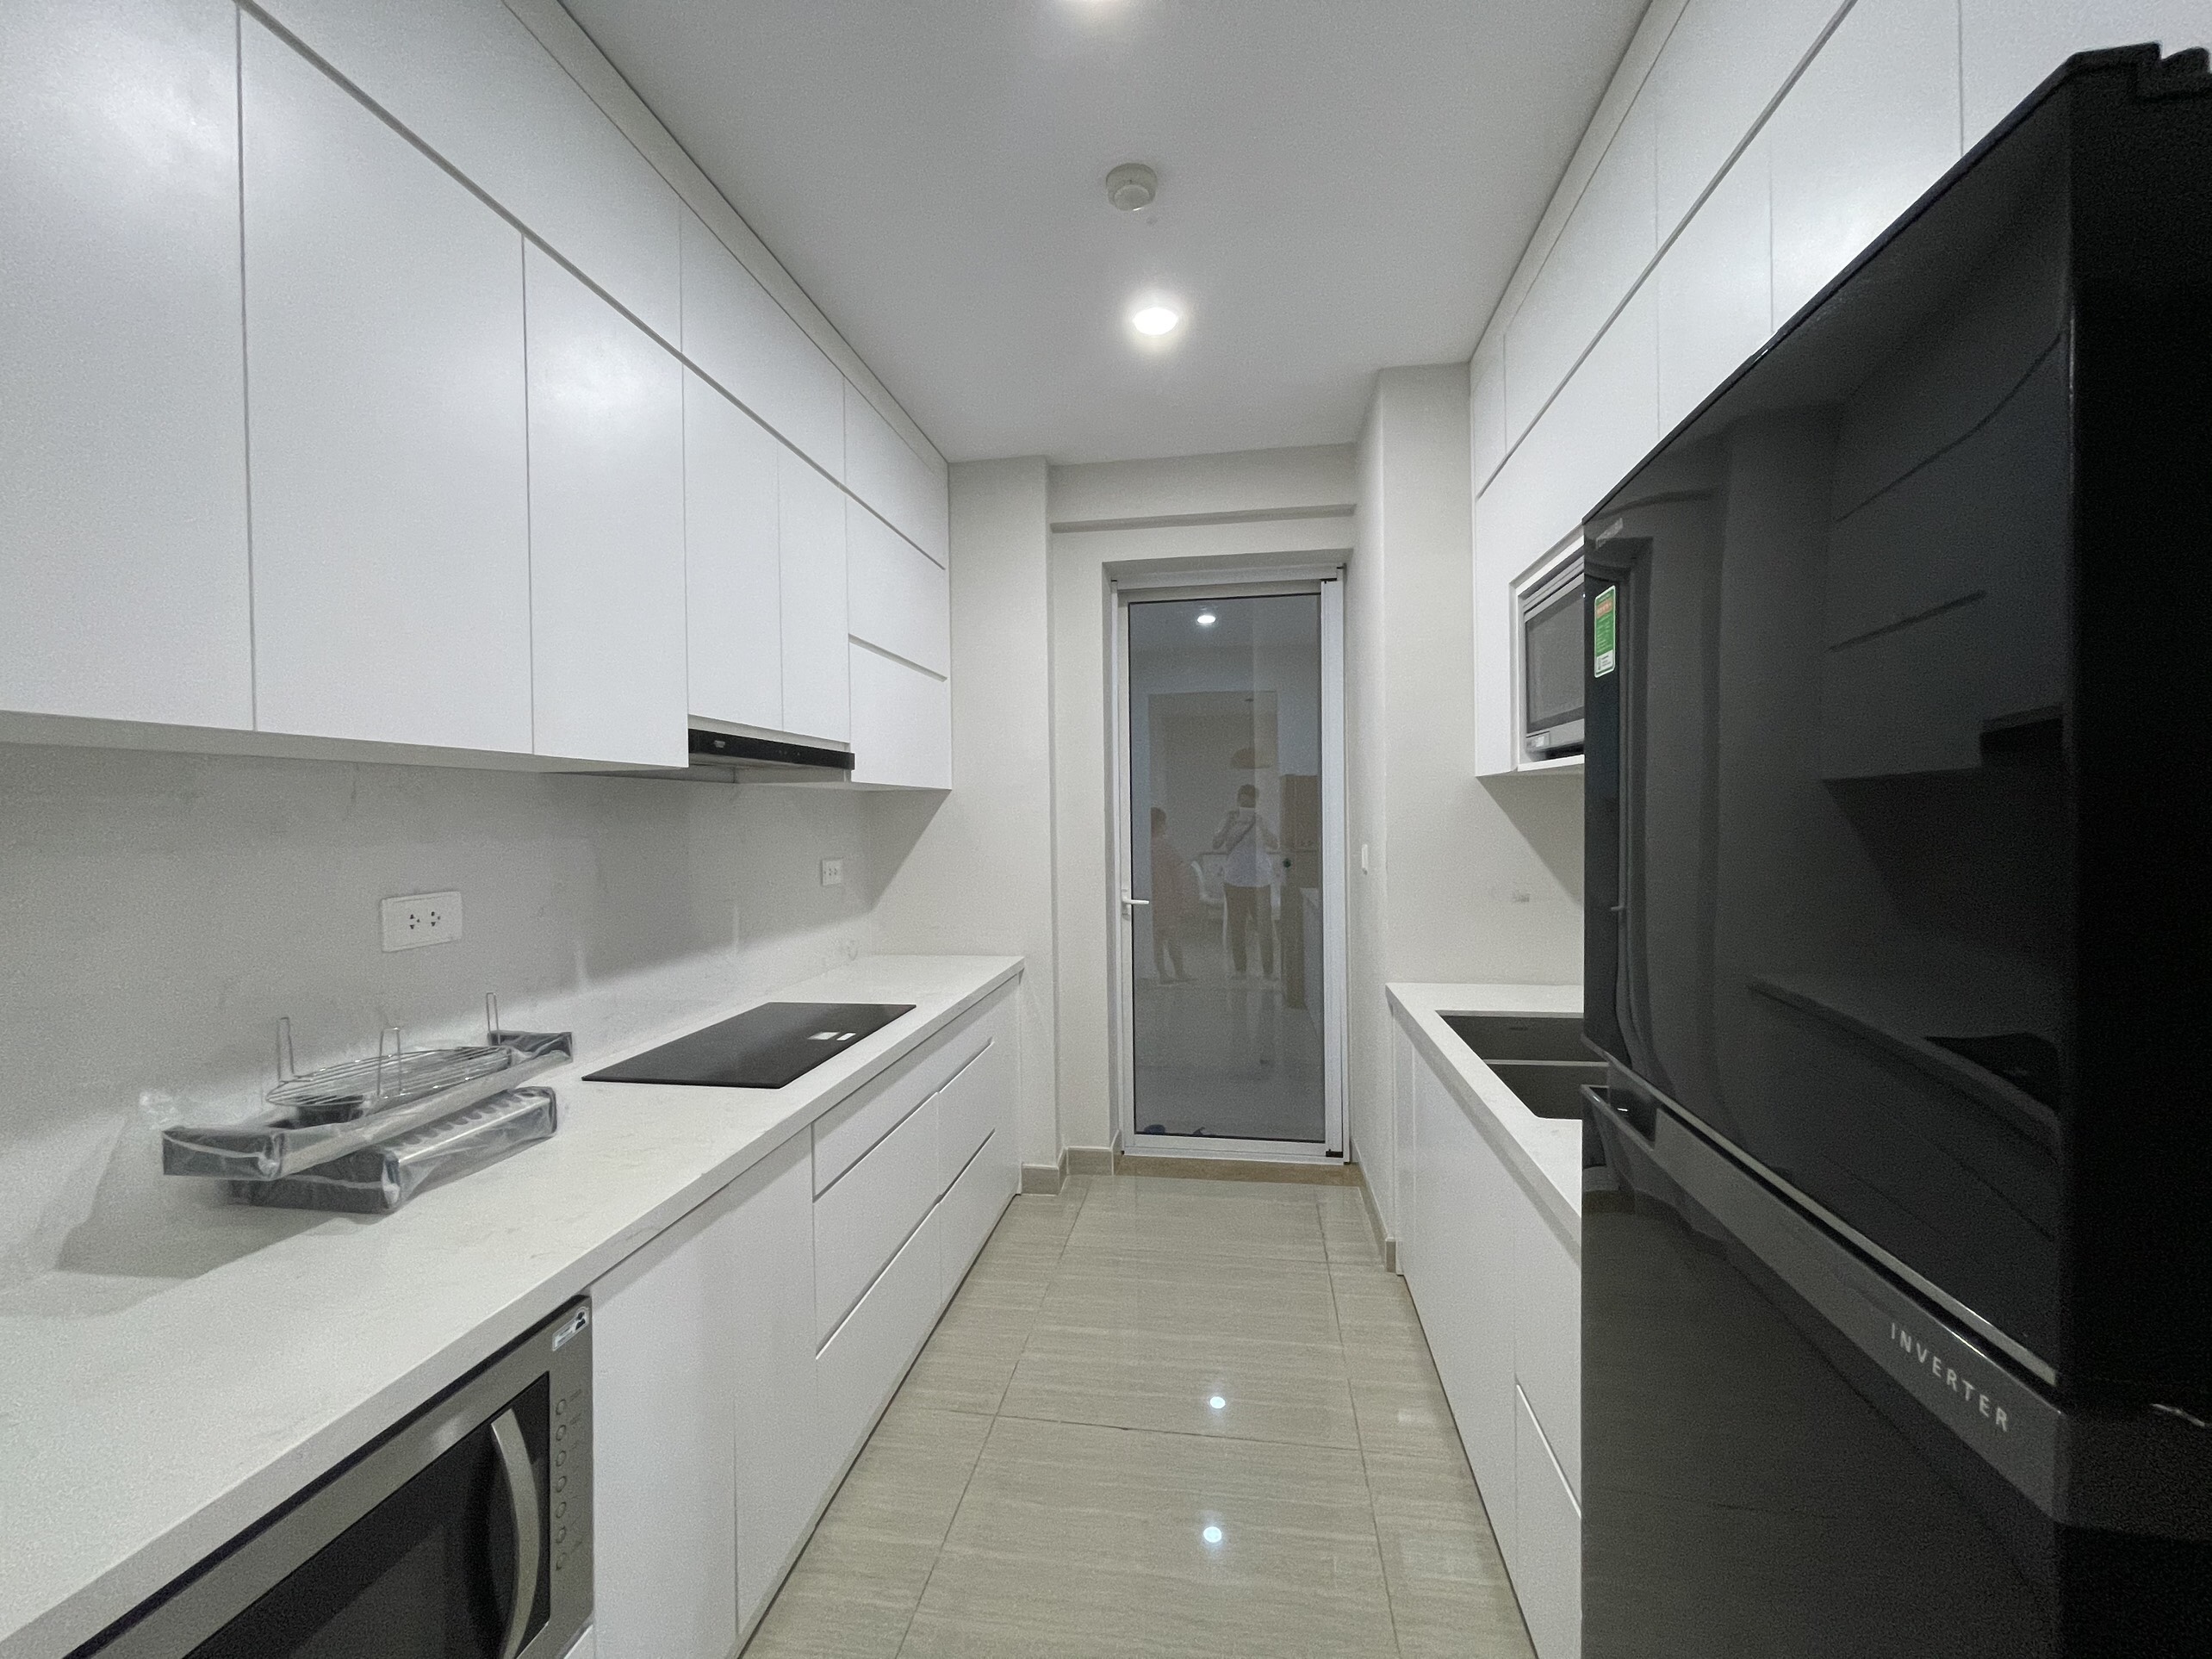 3BR Apartment in L4 tower Ciputra, fully furnished